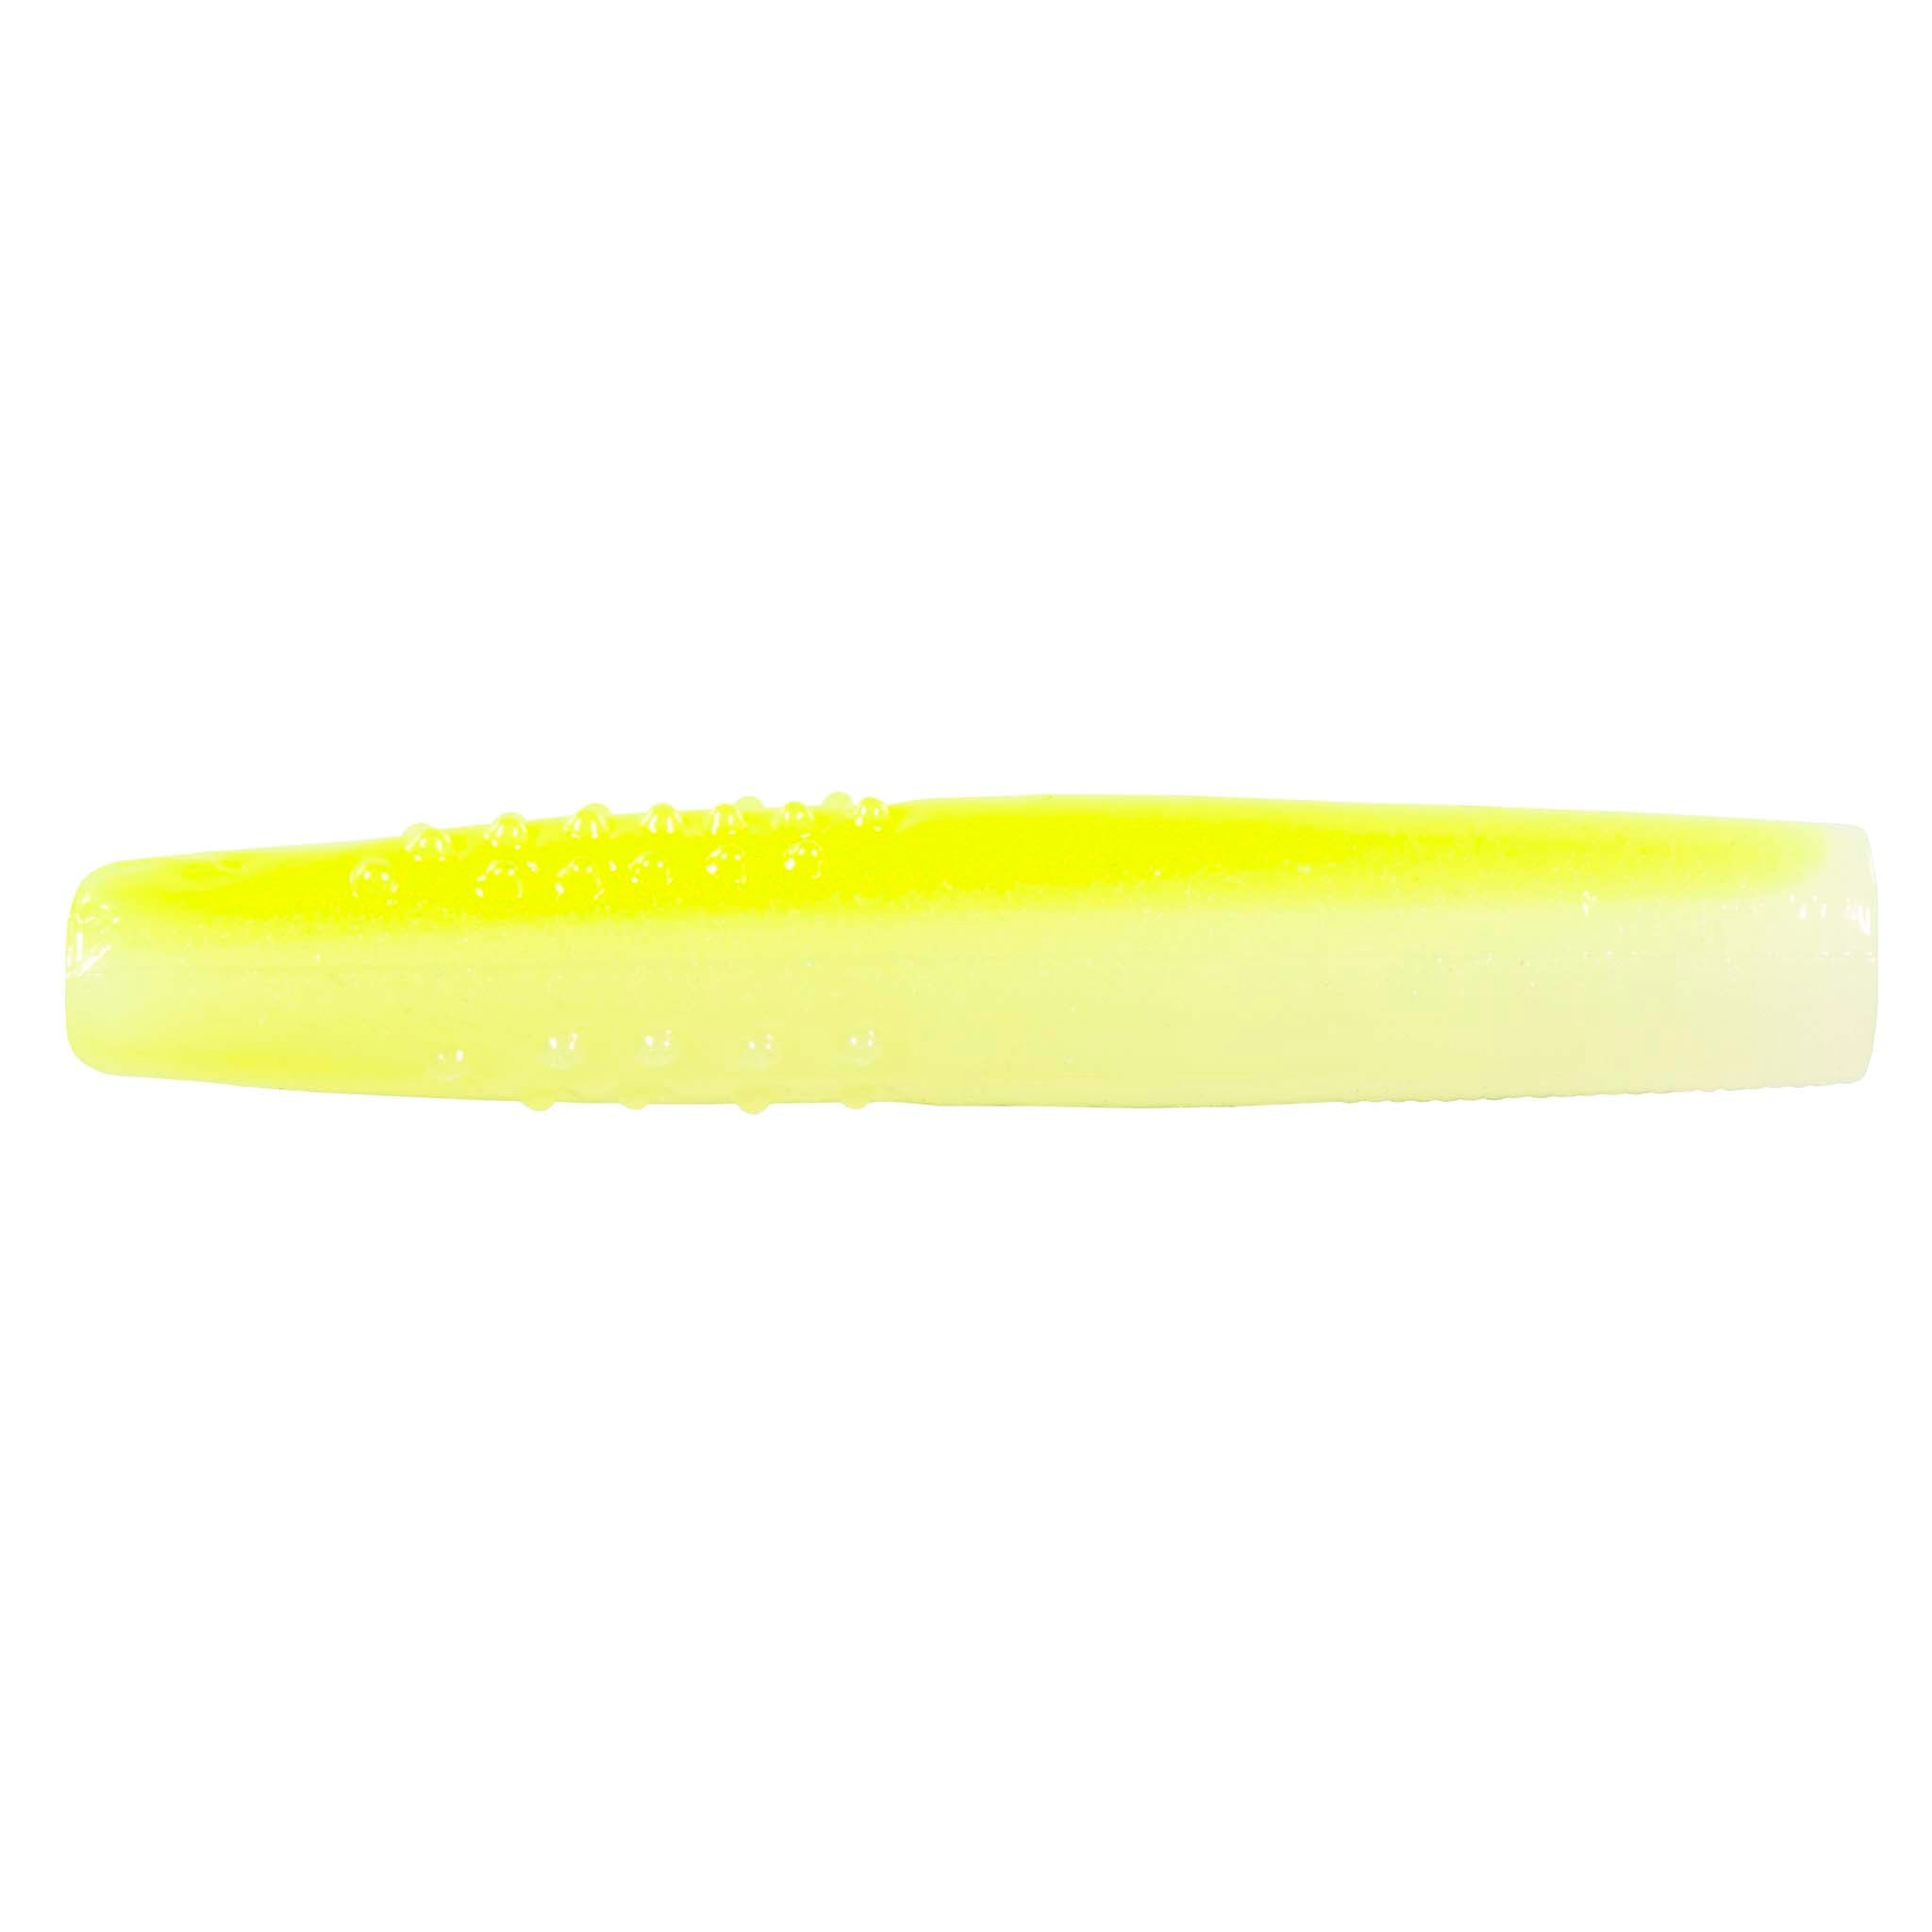 1.75 (8-pack) / Glow Chartreuse